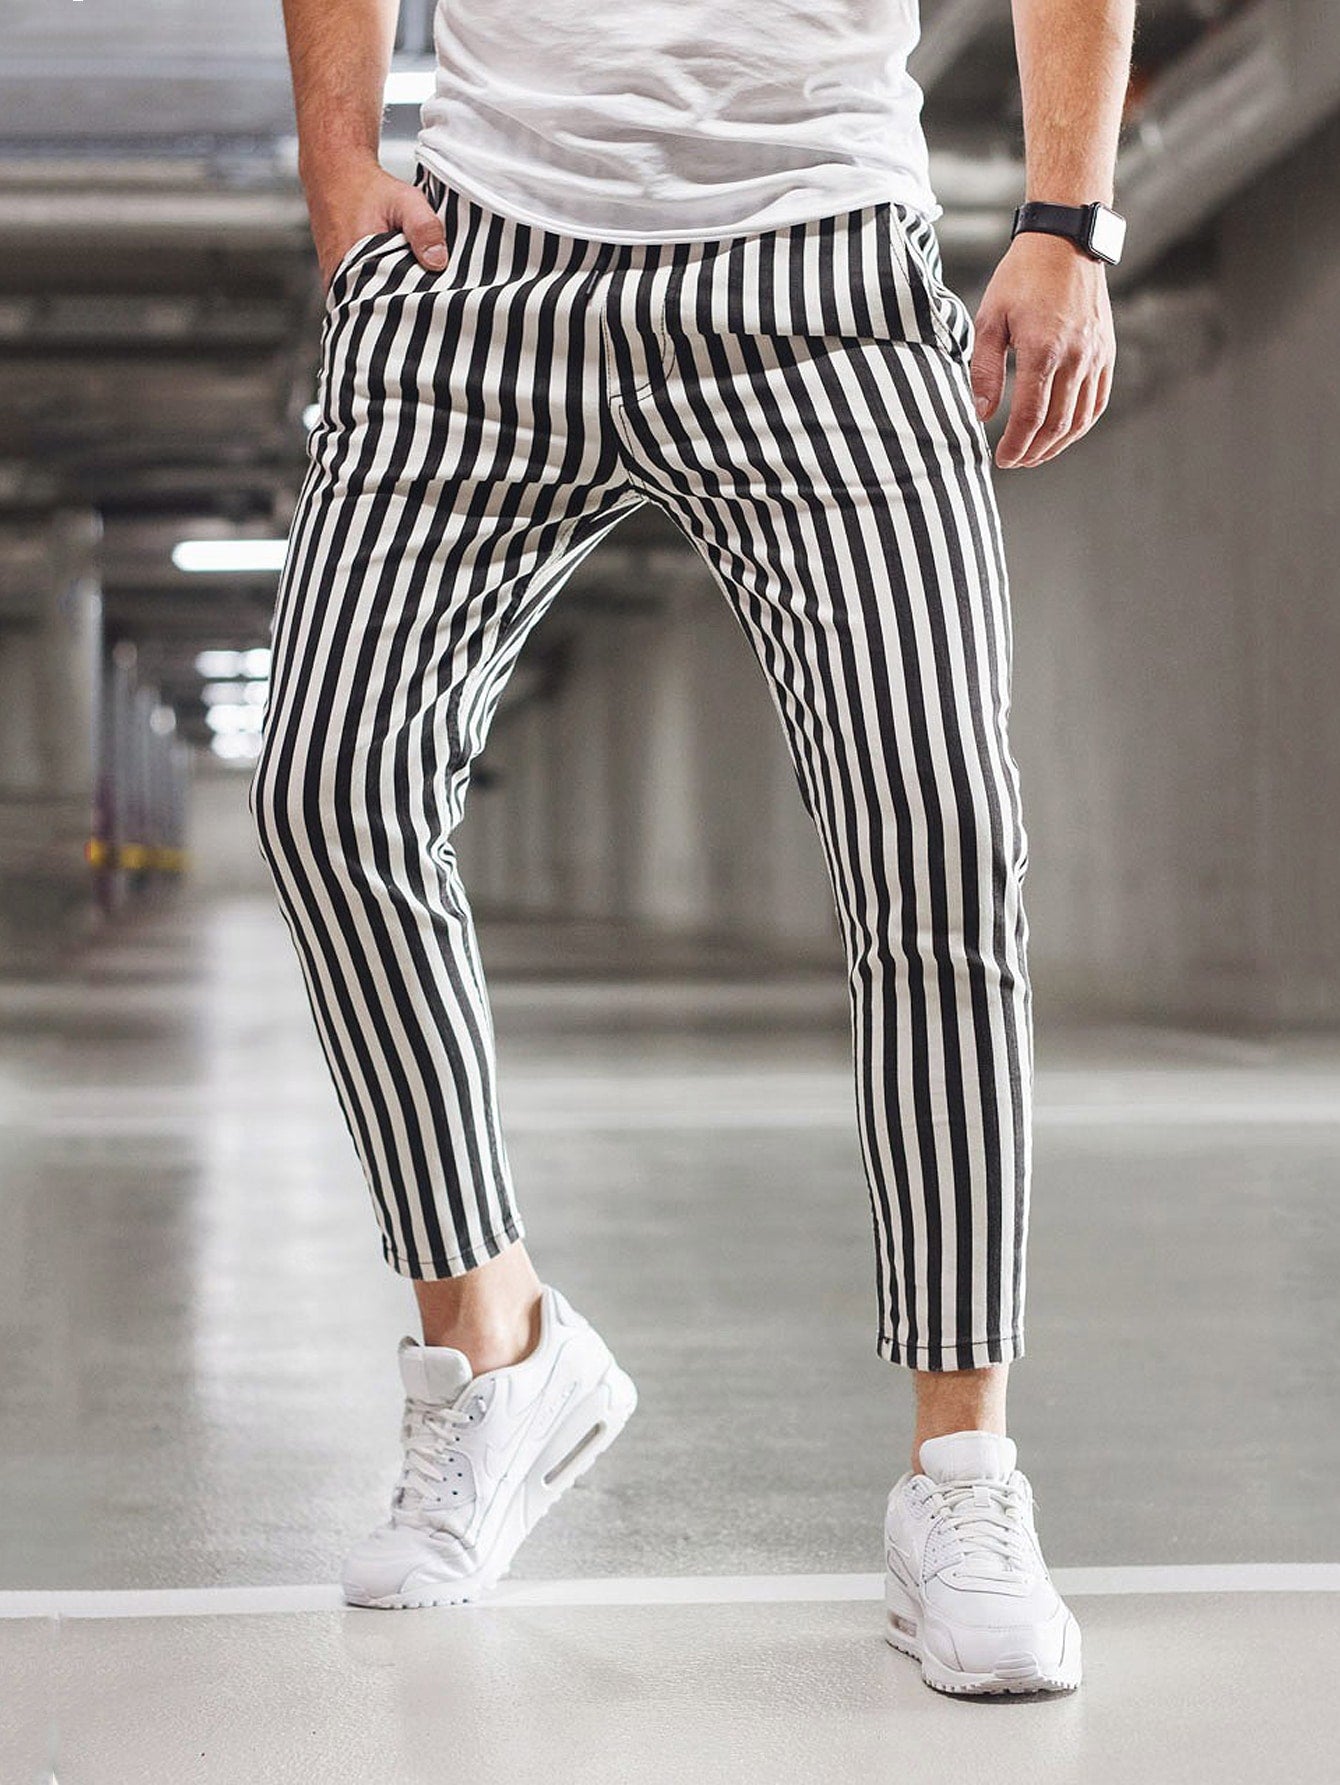 Vertical Striped Print Mens Lounge Pants With Long Elastic Waistband,  Drawstring Pockets, And Straight Leg Casual Streetwear Trousers From  Colletteny, $17.34 | DHgate.Com